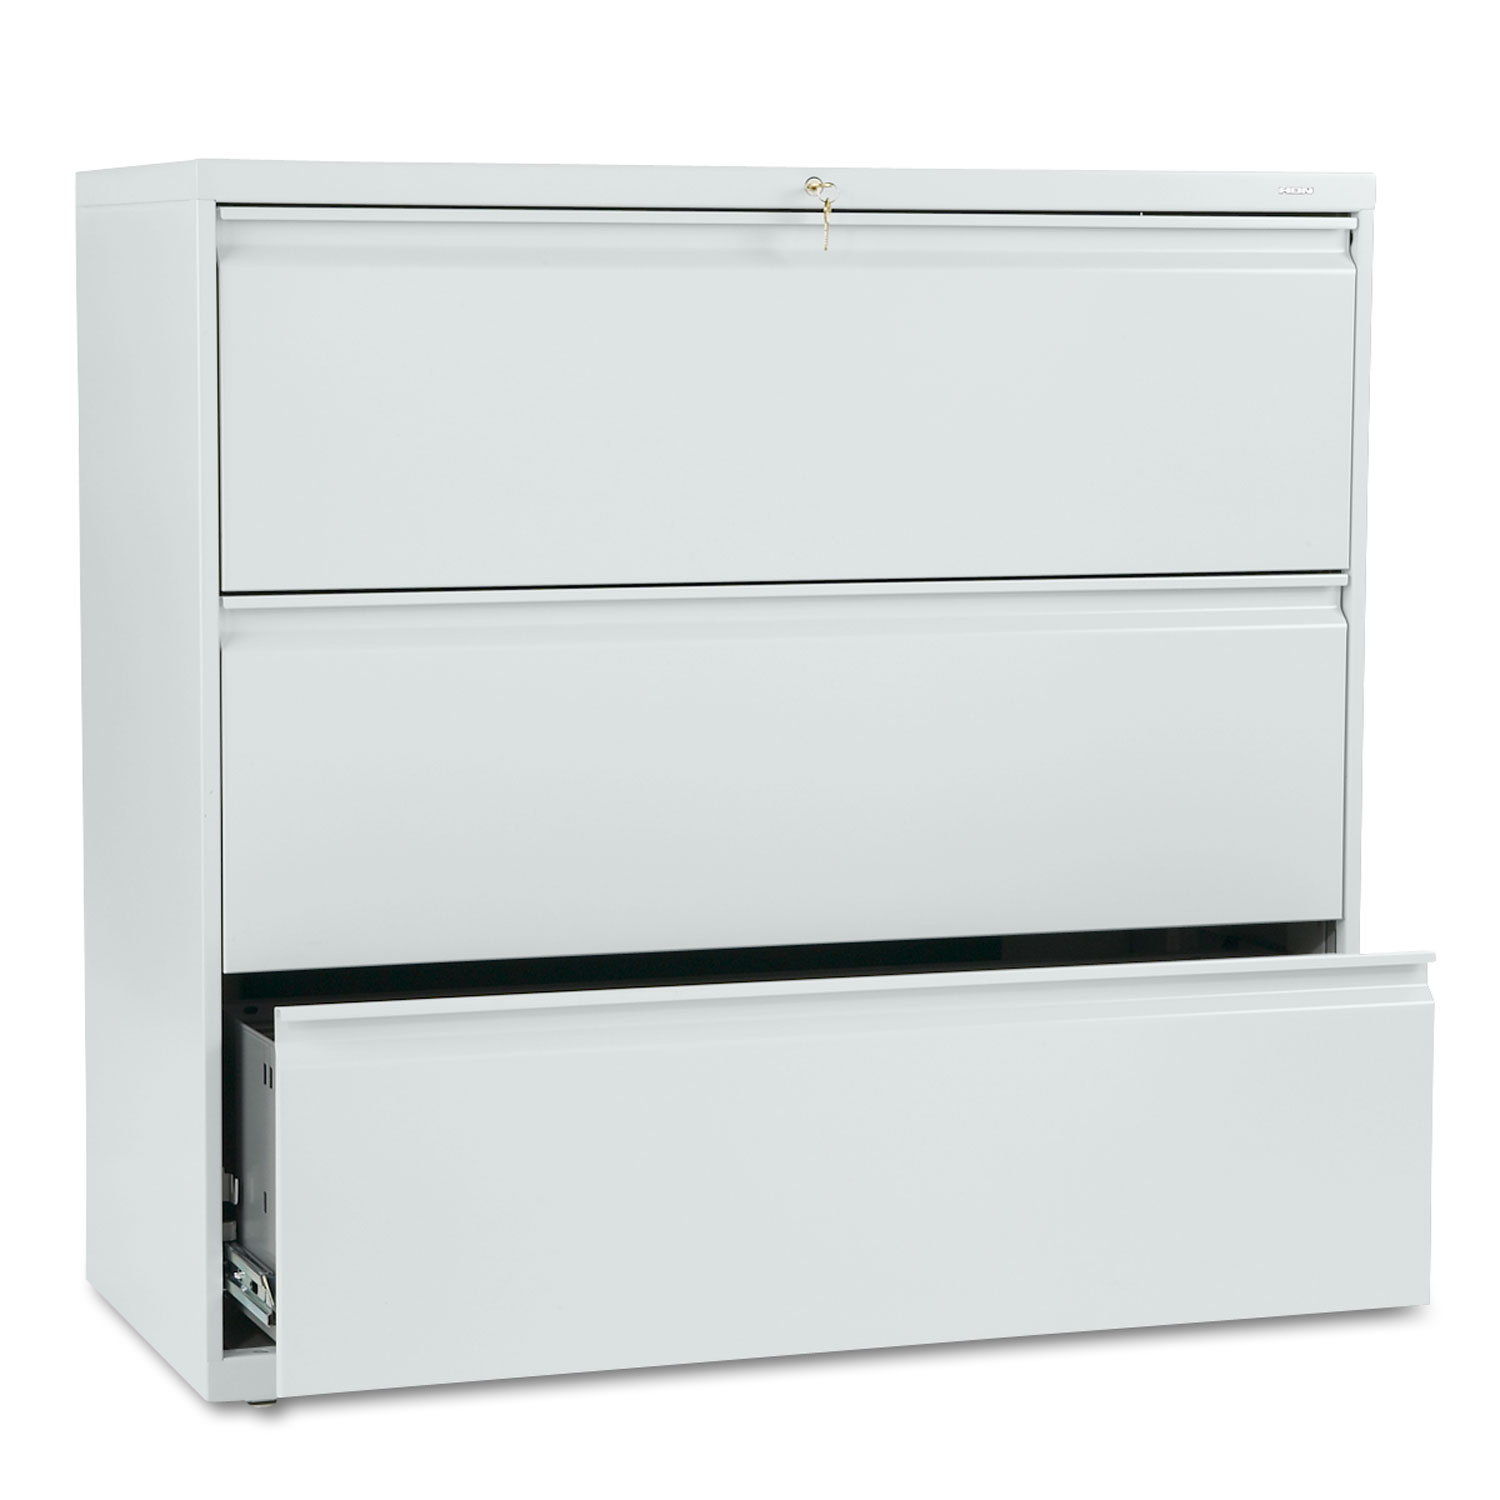 800 Series Three-Drawer Lateral File, 42w x 19-1/4d x 40-7/8h, Light Gray